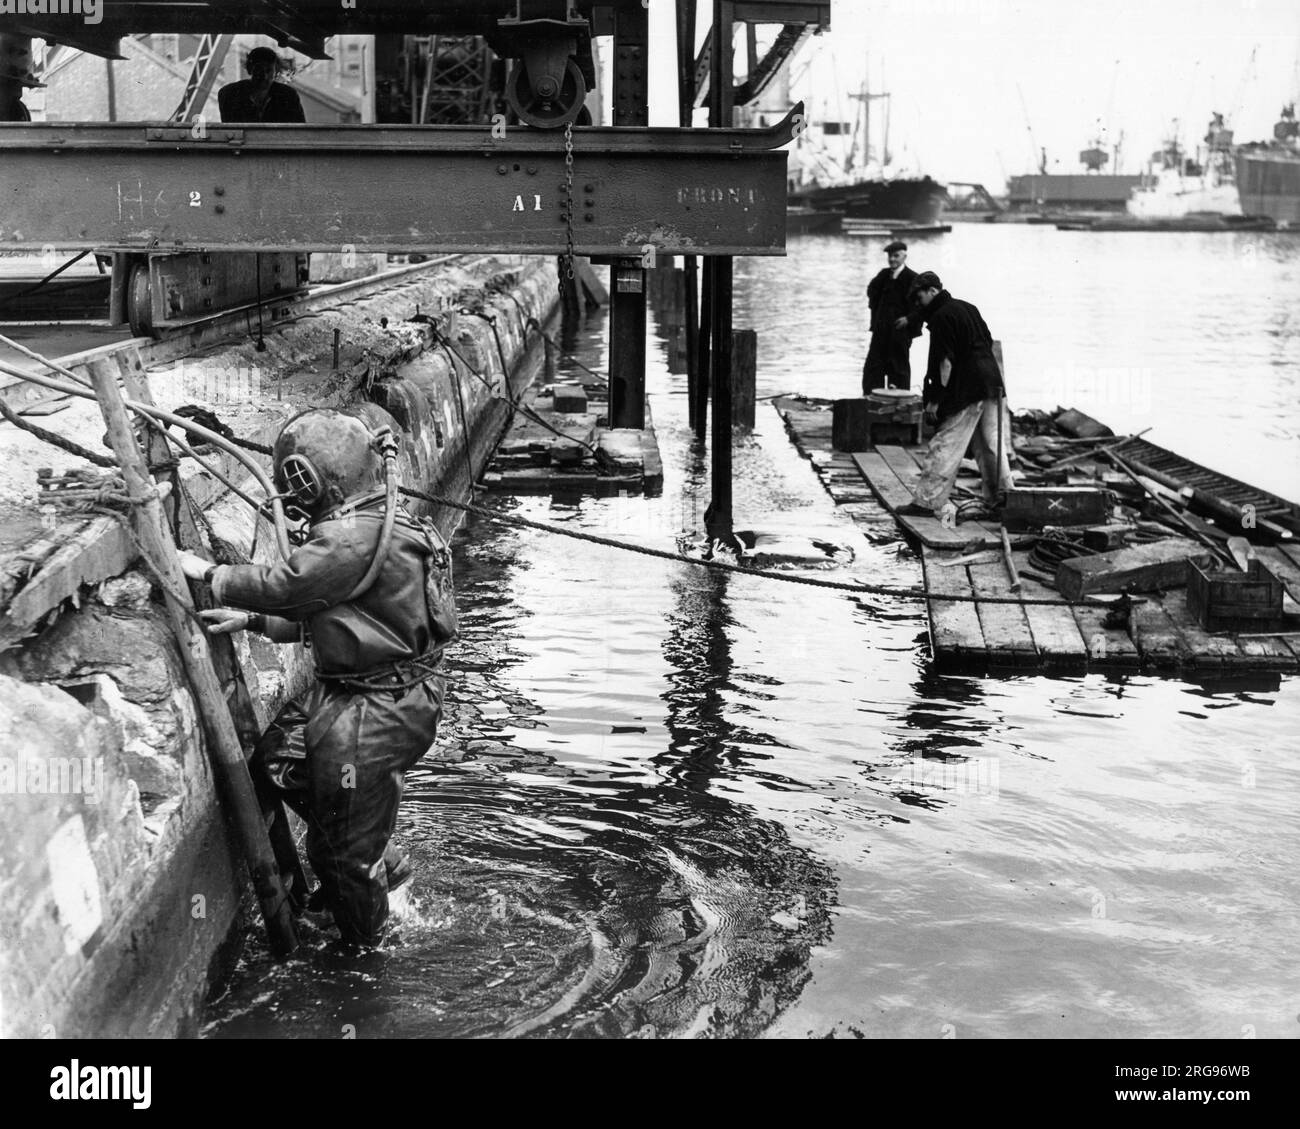 Dockside scene with two men on a raft, and a man in a heavy diving suit on the left, River Thames, Port of London. Stock Photo